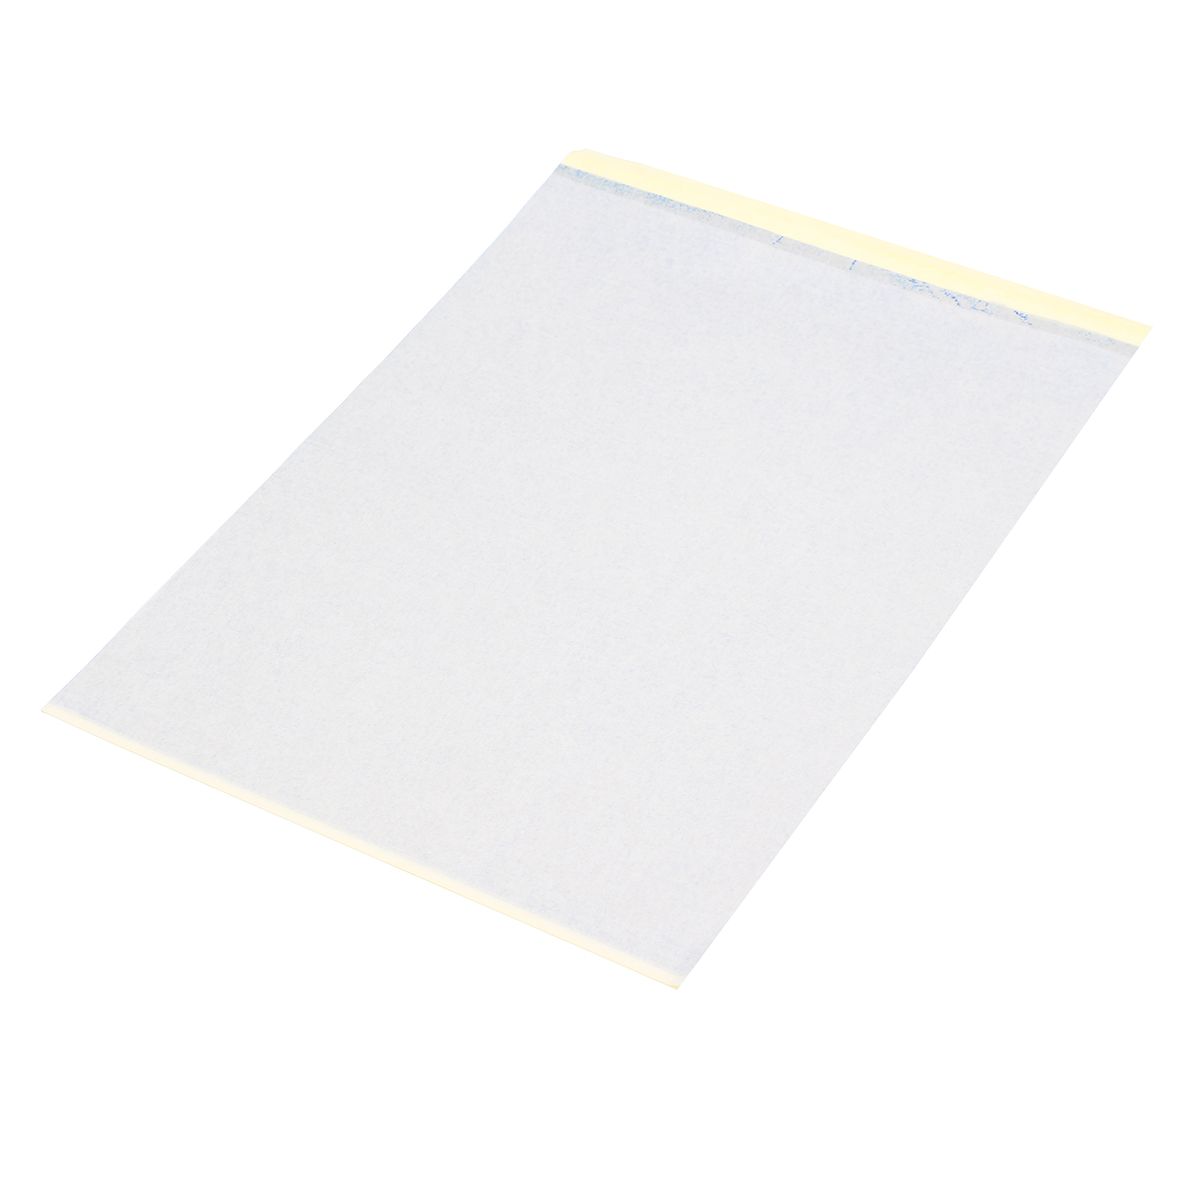 100Pcs-A4-Tattoo-Spirit-Carbon-Papers-Reusable-Thermal-Transfer-Copier-Paper-Stencil-Kits-1364235